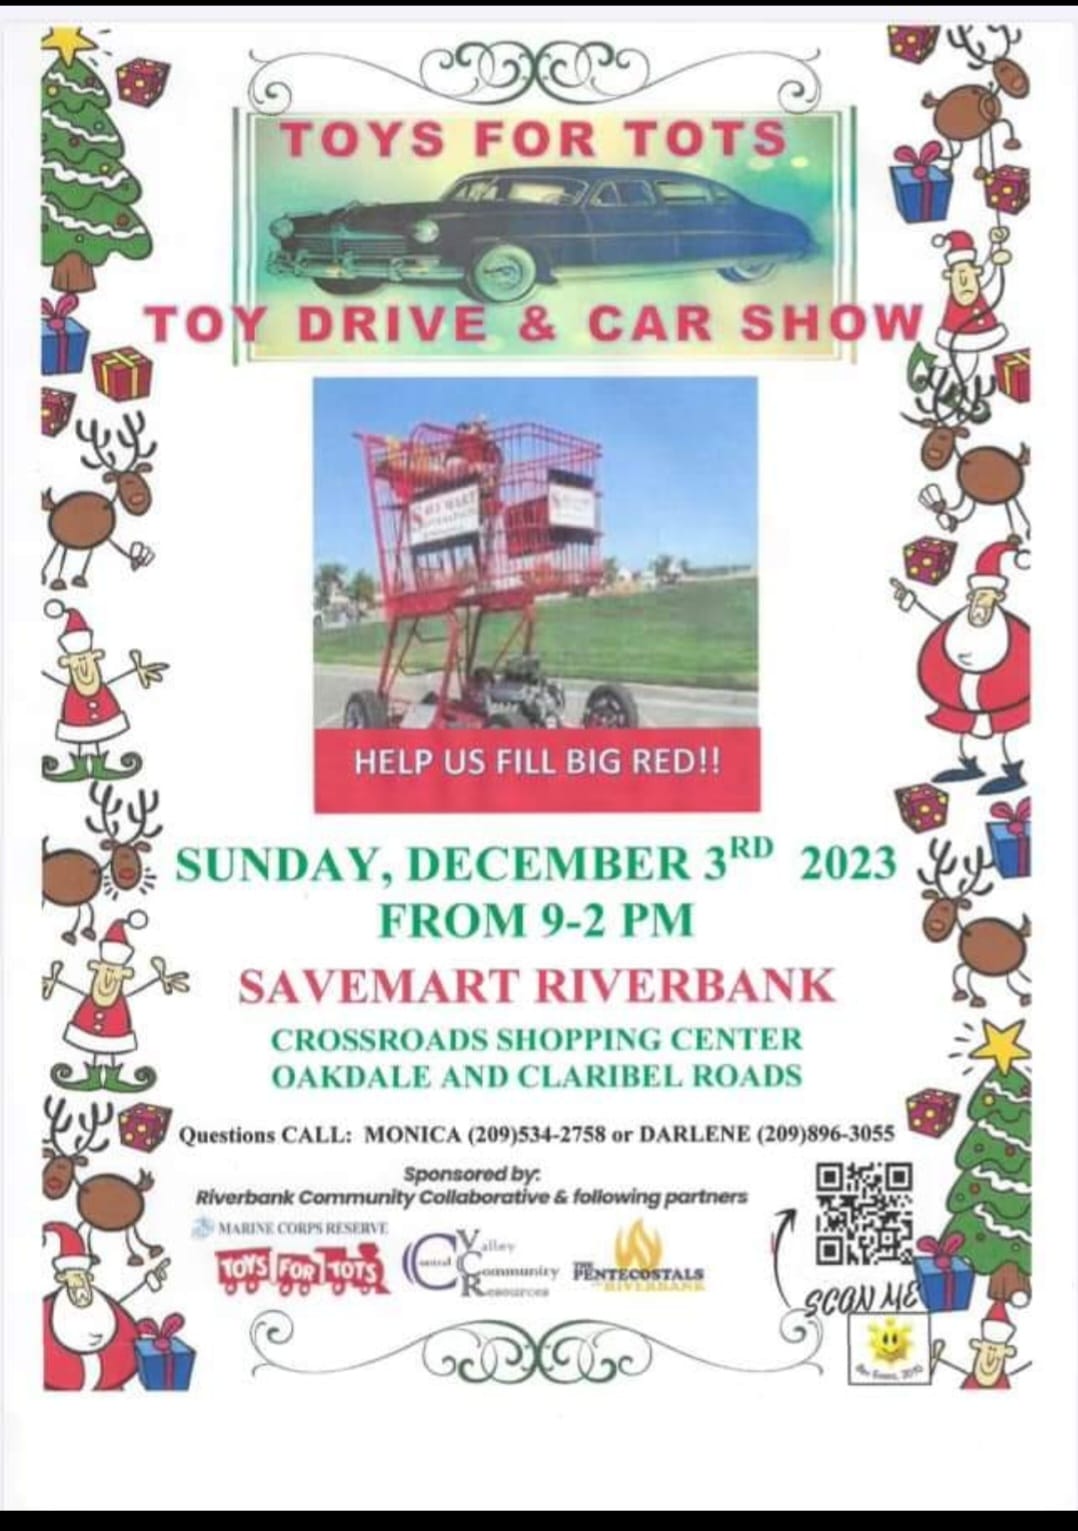 Toys For Tots Toy Drive & Car Show